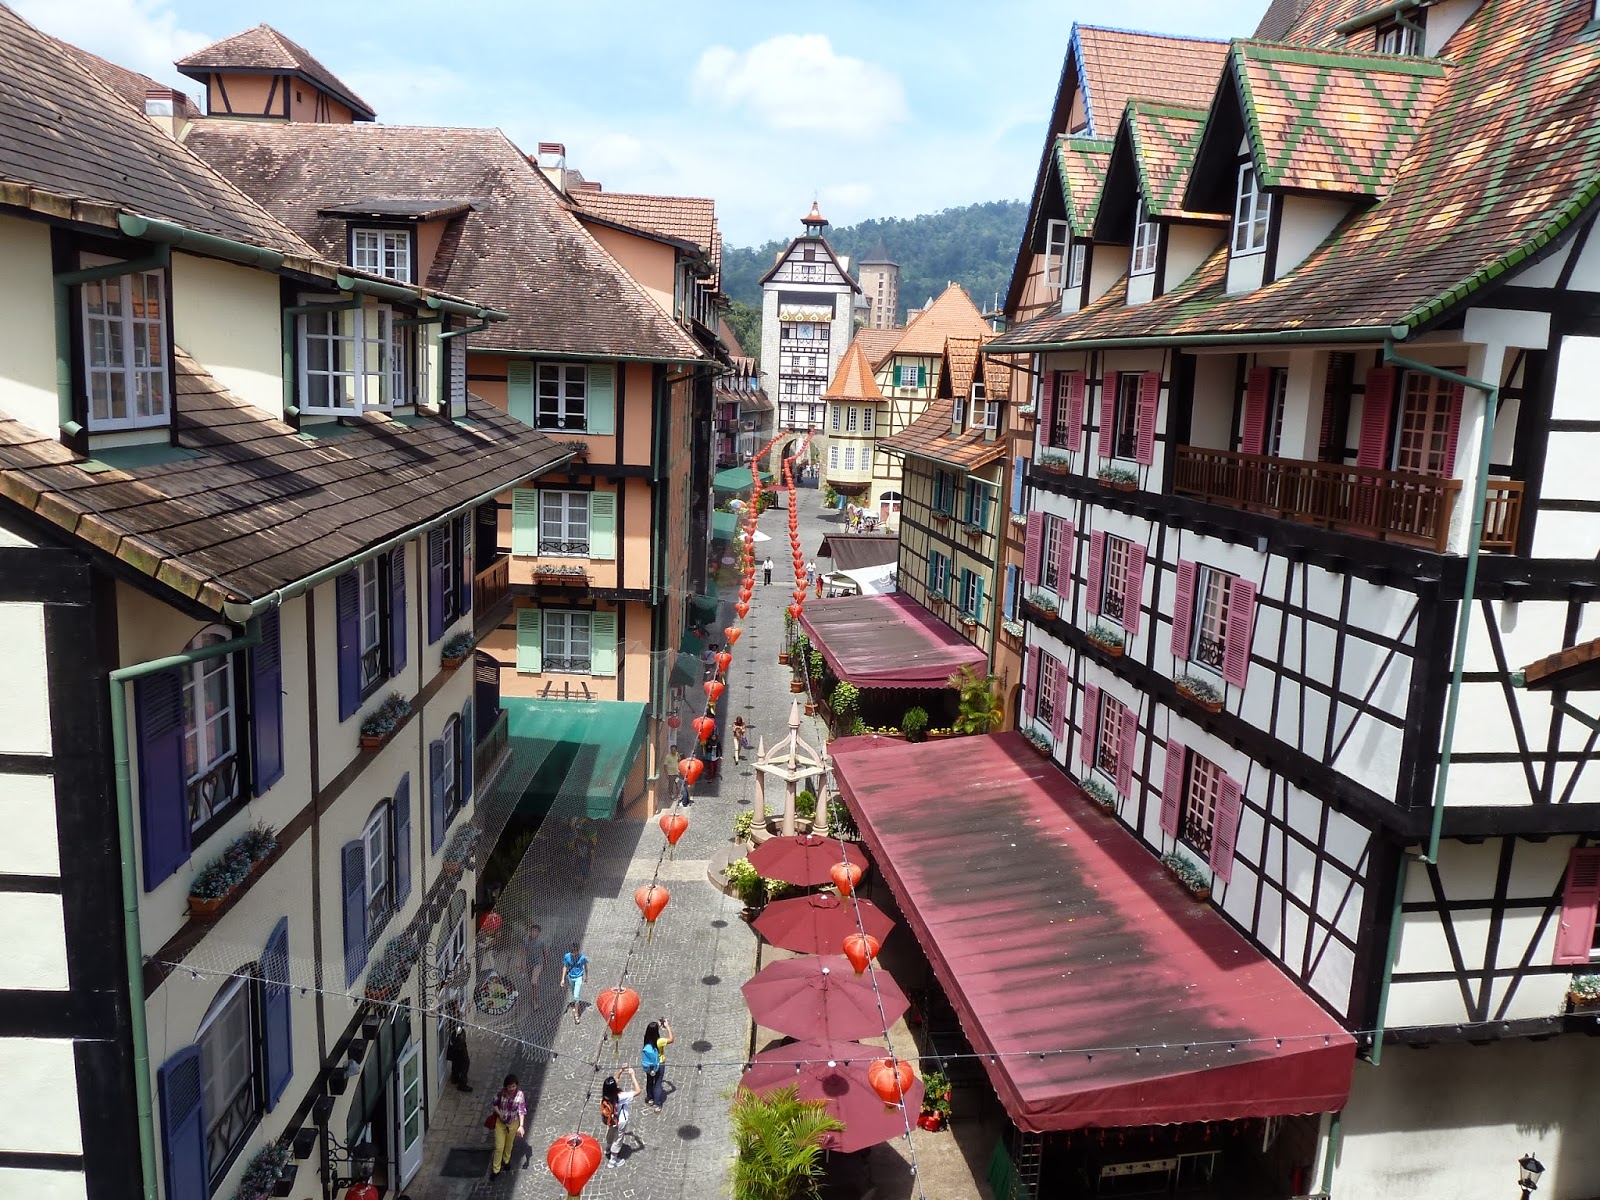 Kee Hua Chee Live! COLMAR TROPICALEA FRENCH VILLAGE IN